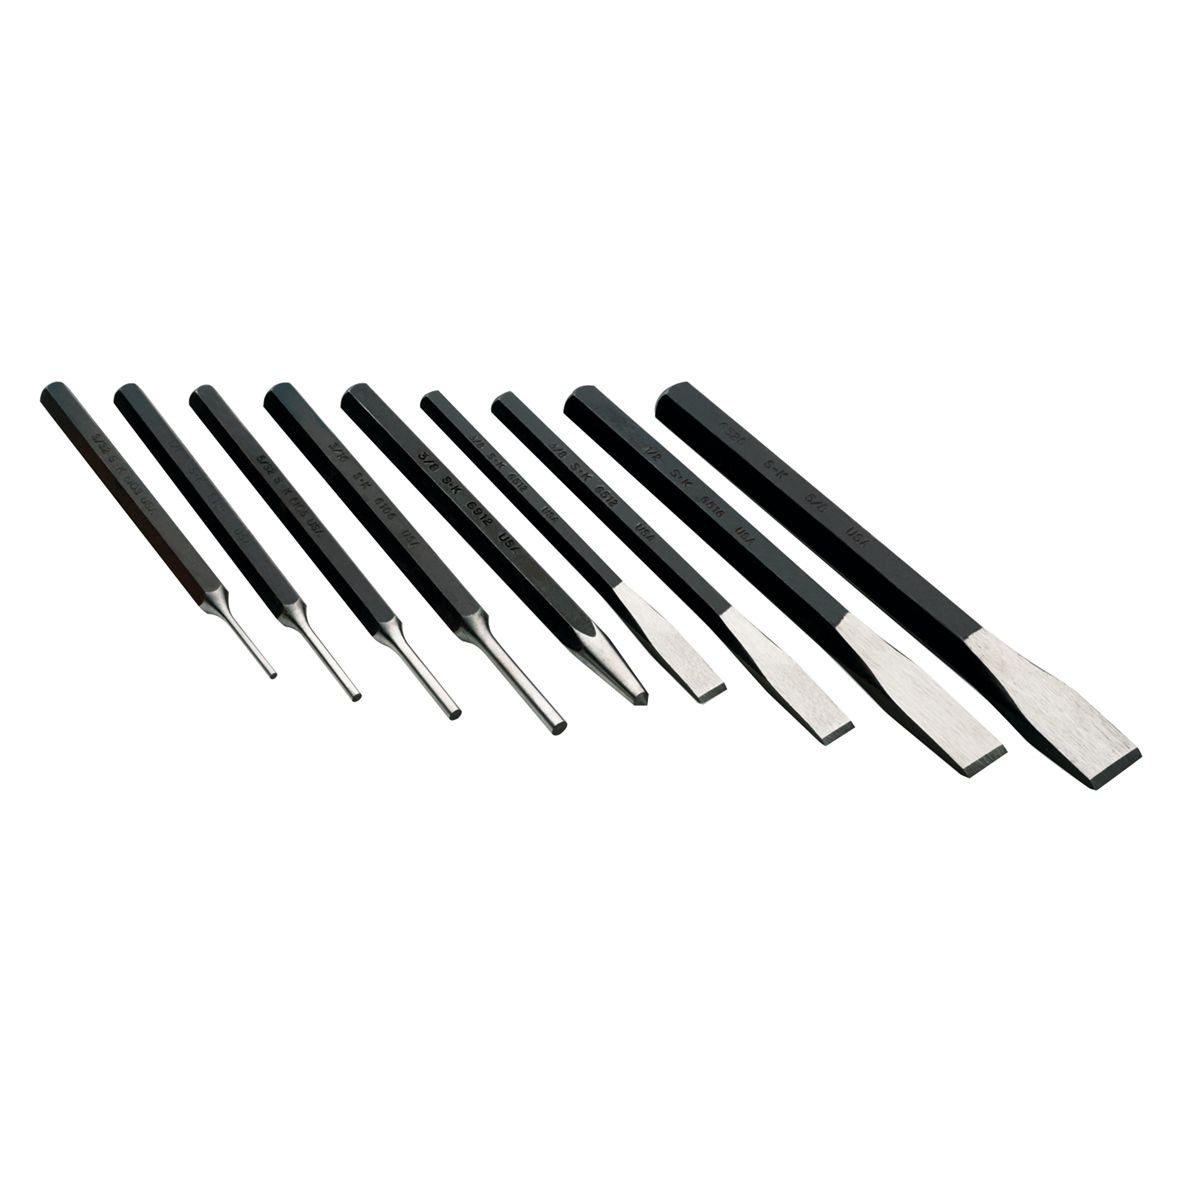 Punch and Chisel Set - 9 Pc